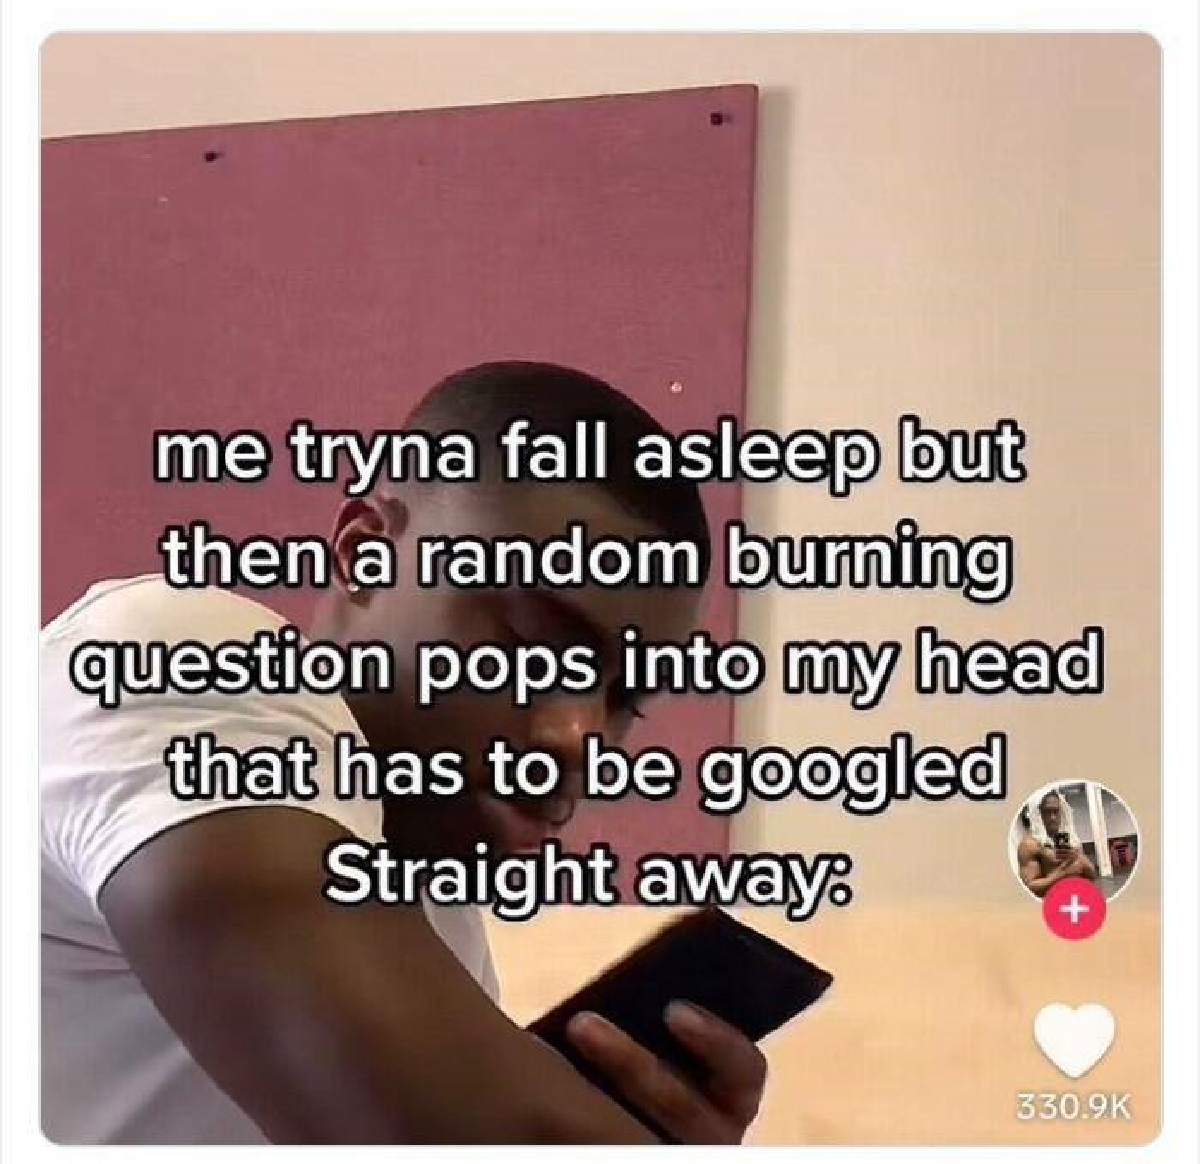 photo caption - me tryna fall asleep but then a random burning question pops into my head that has to be googled Straight away.